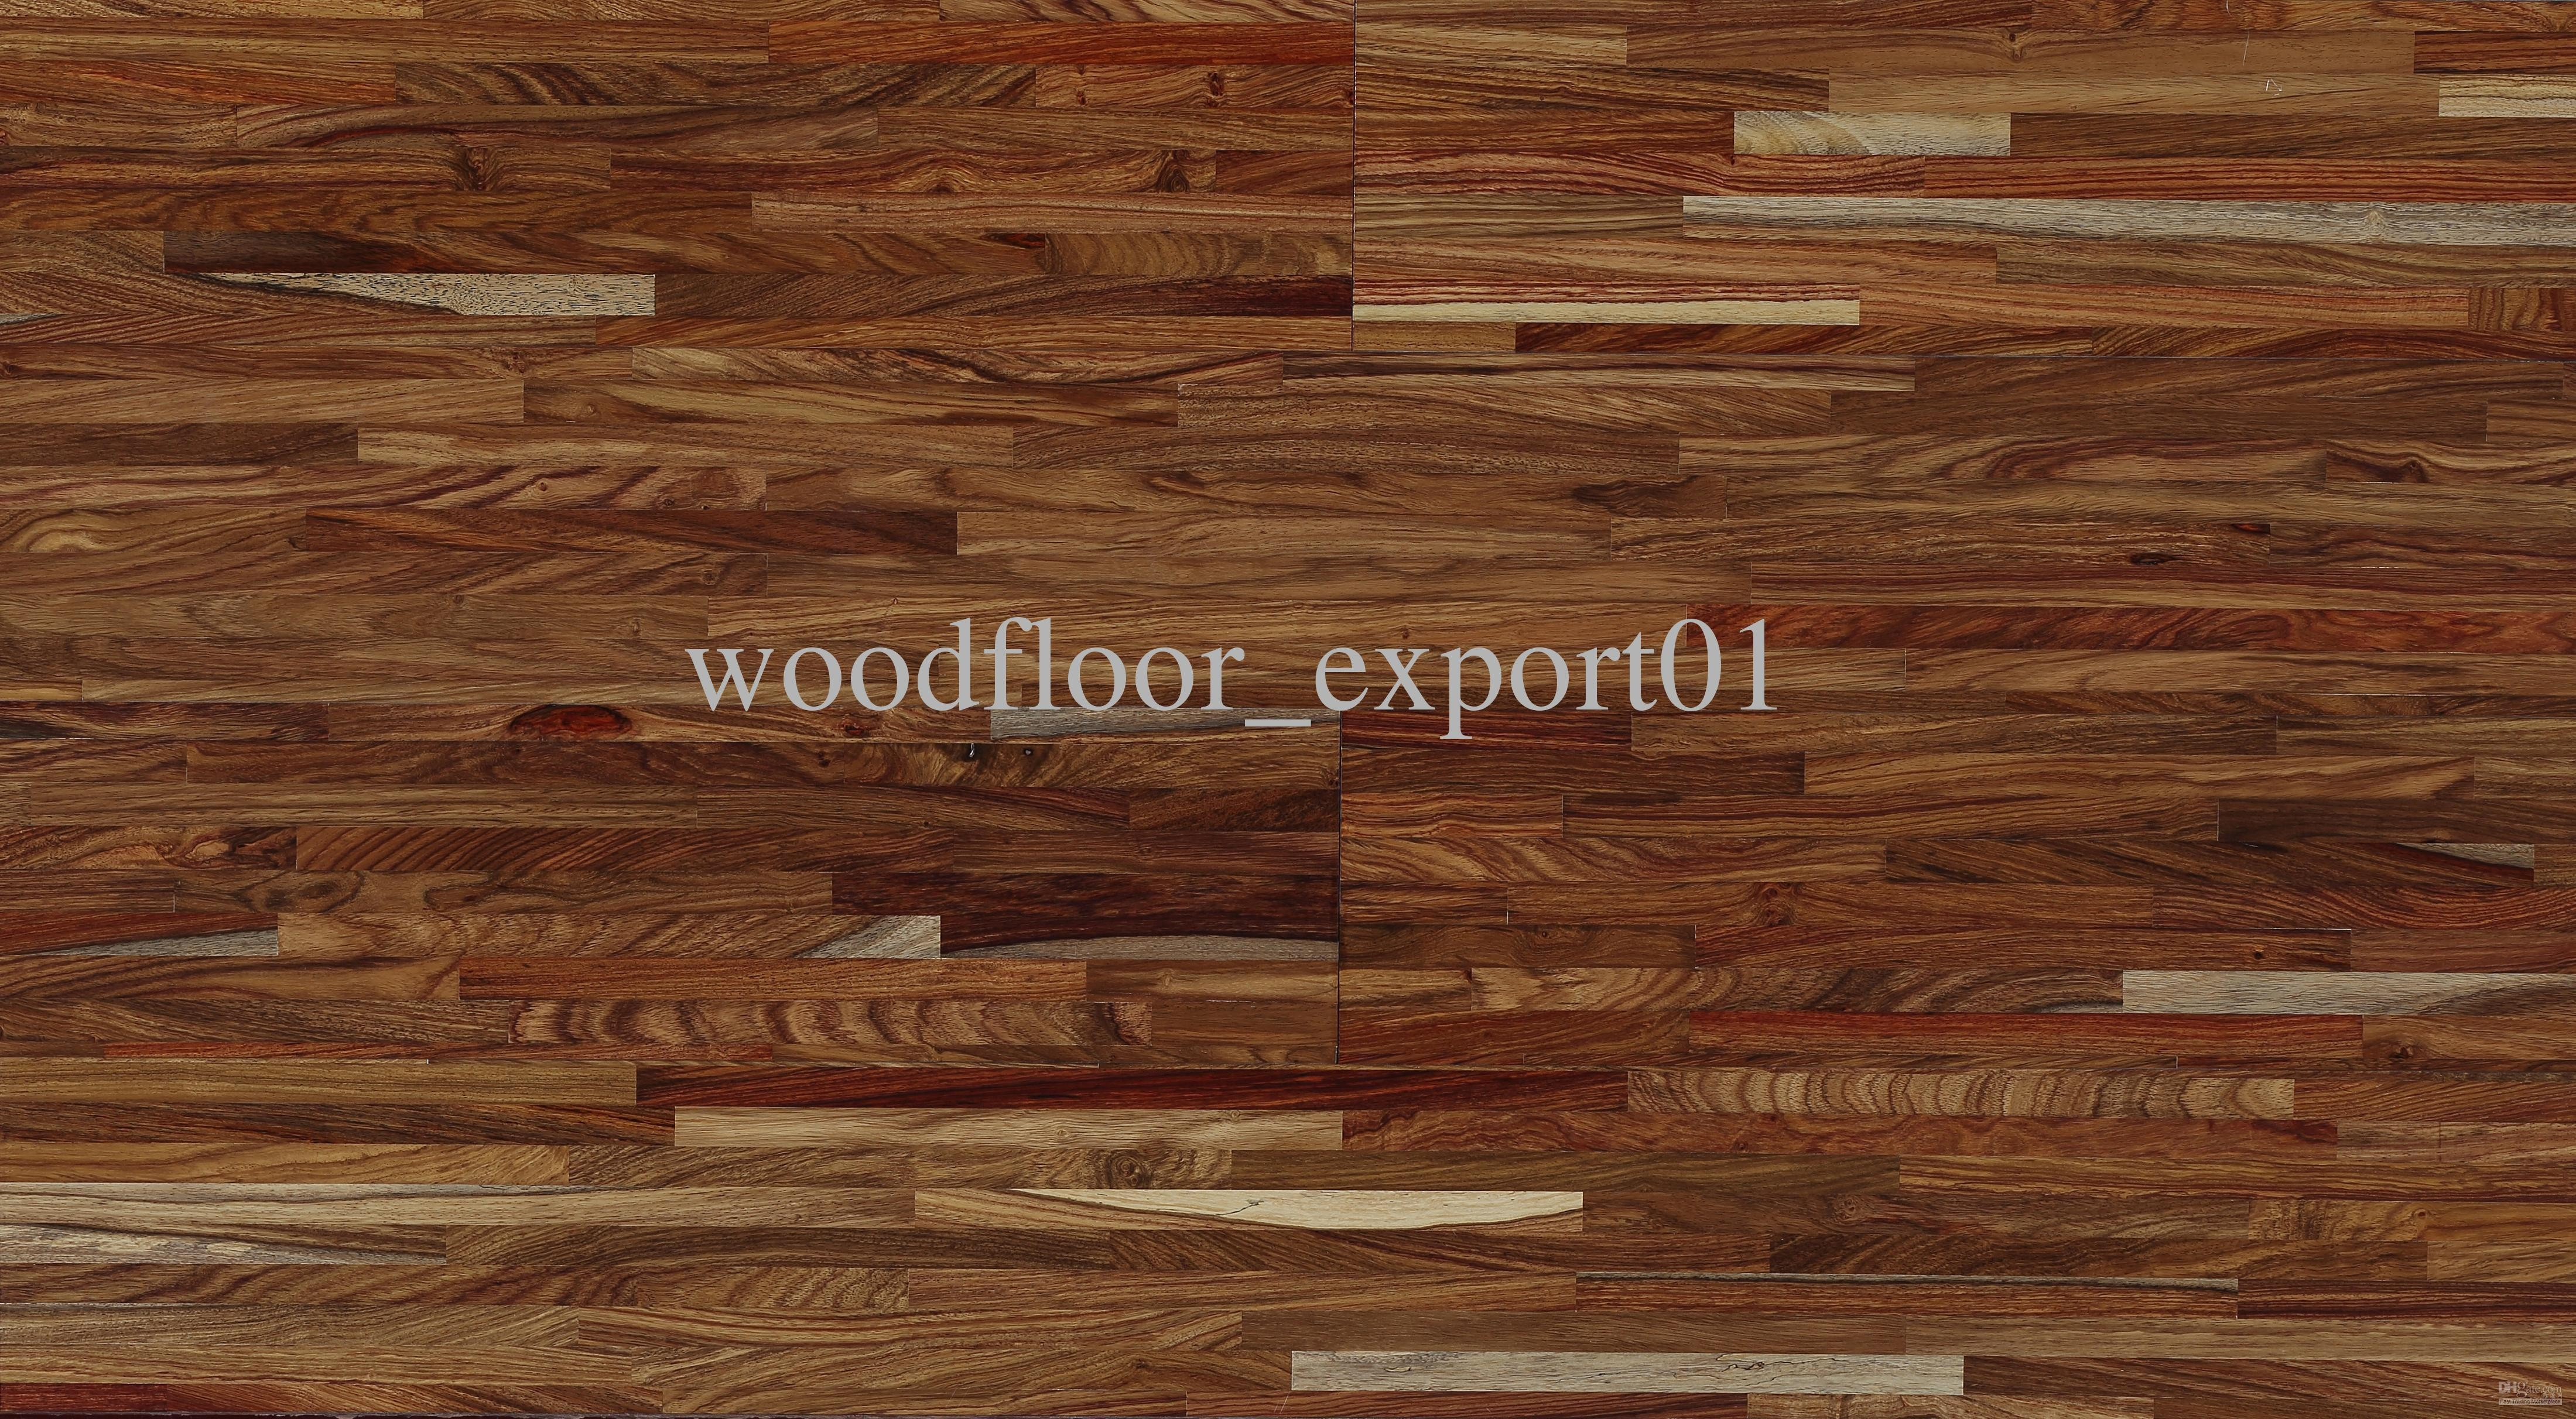 26 Lovely Hardwood Flooring for Sale by Owner 2024 free download hardwood flooring for sale by owner of flooring nj furniture design hard wood flooring new 0d grace place intended for flooring nj where to buy hardwood flooring inspirational 0d grace place